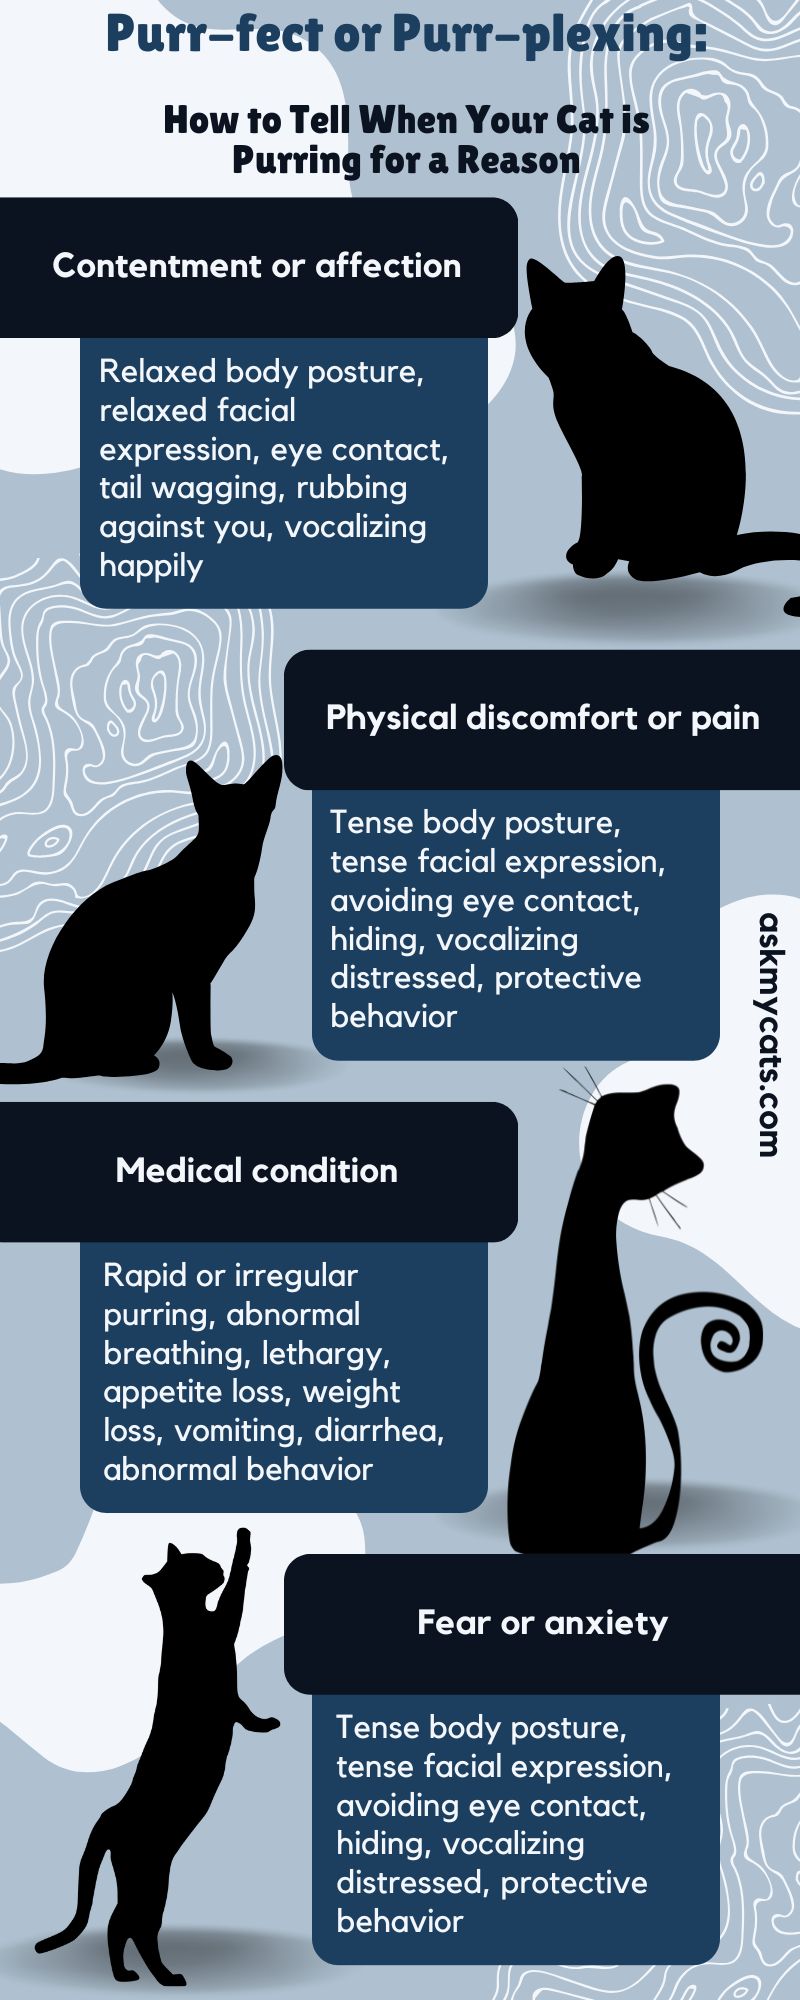 Purr-fect or Purr-plexing:  How to Tell When Your Cat is Purring for a Reason